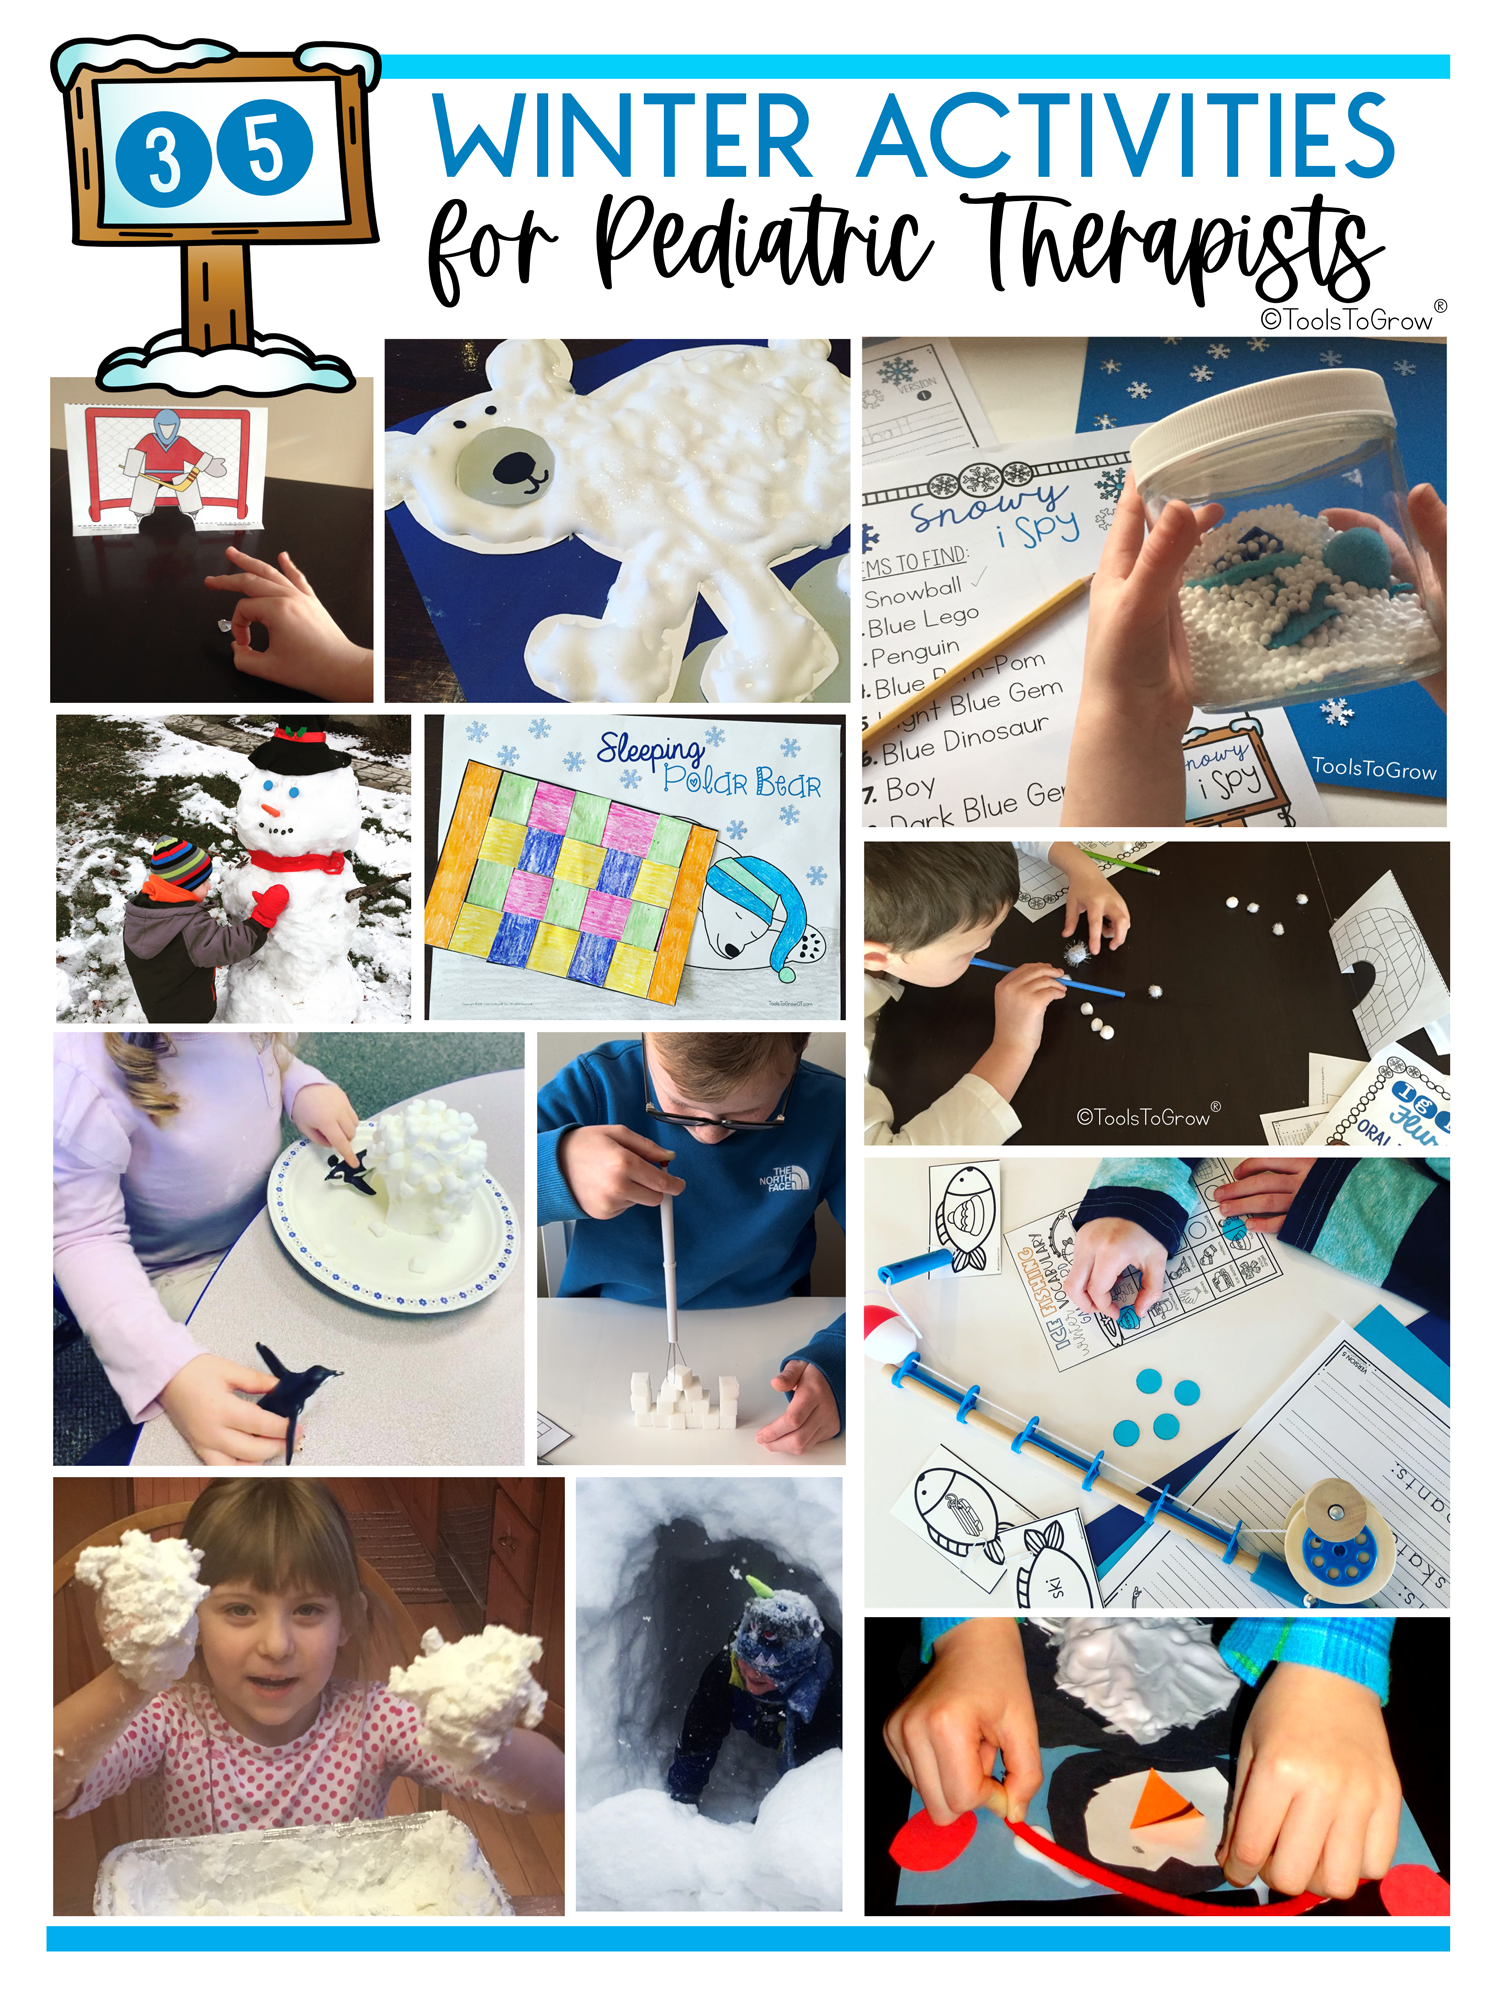 35 Winter Ideas for Pediatric Occupational Therapy Fun!